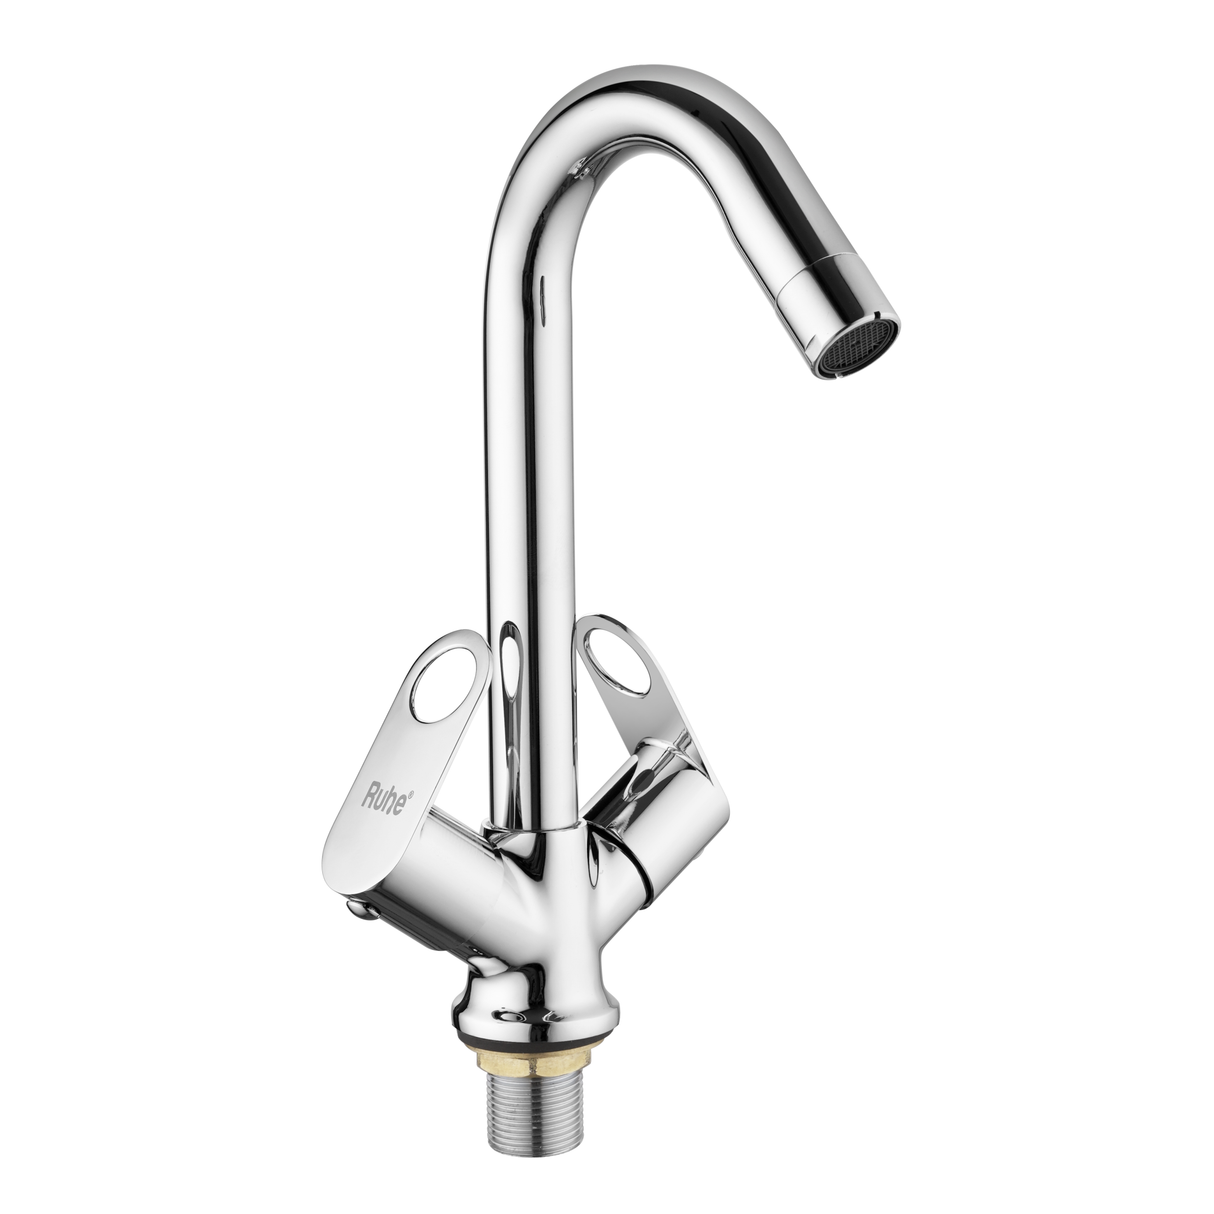 Orbit Centre Hole Basin Mixer with Small (12 inches) Round Swivel Spout Faucet